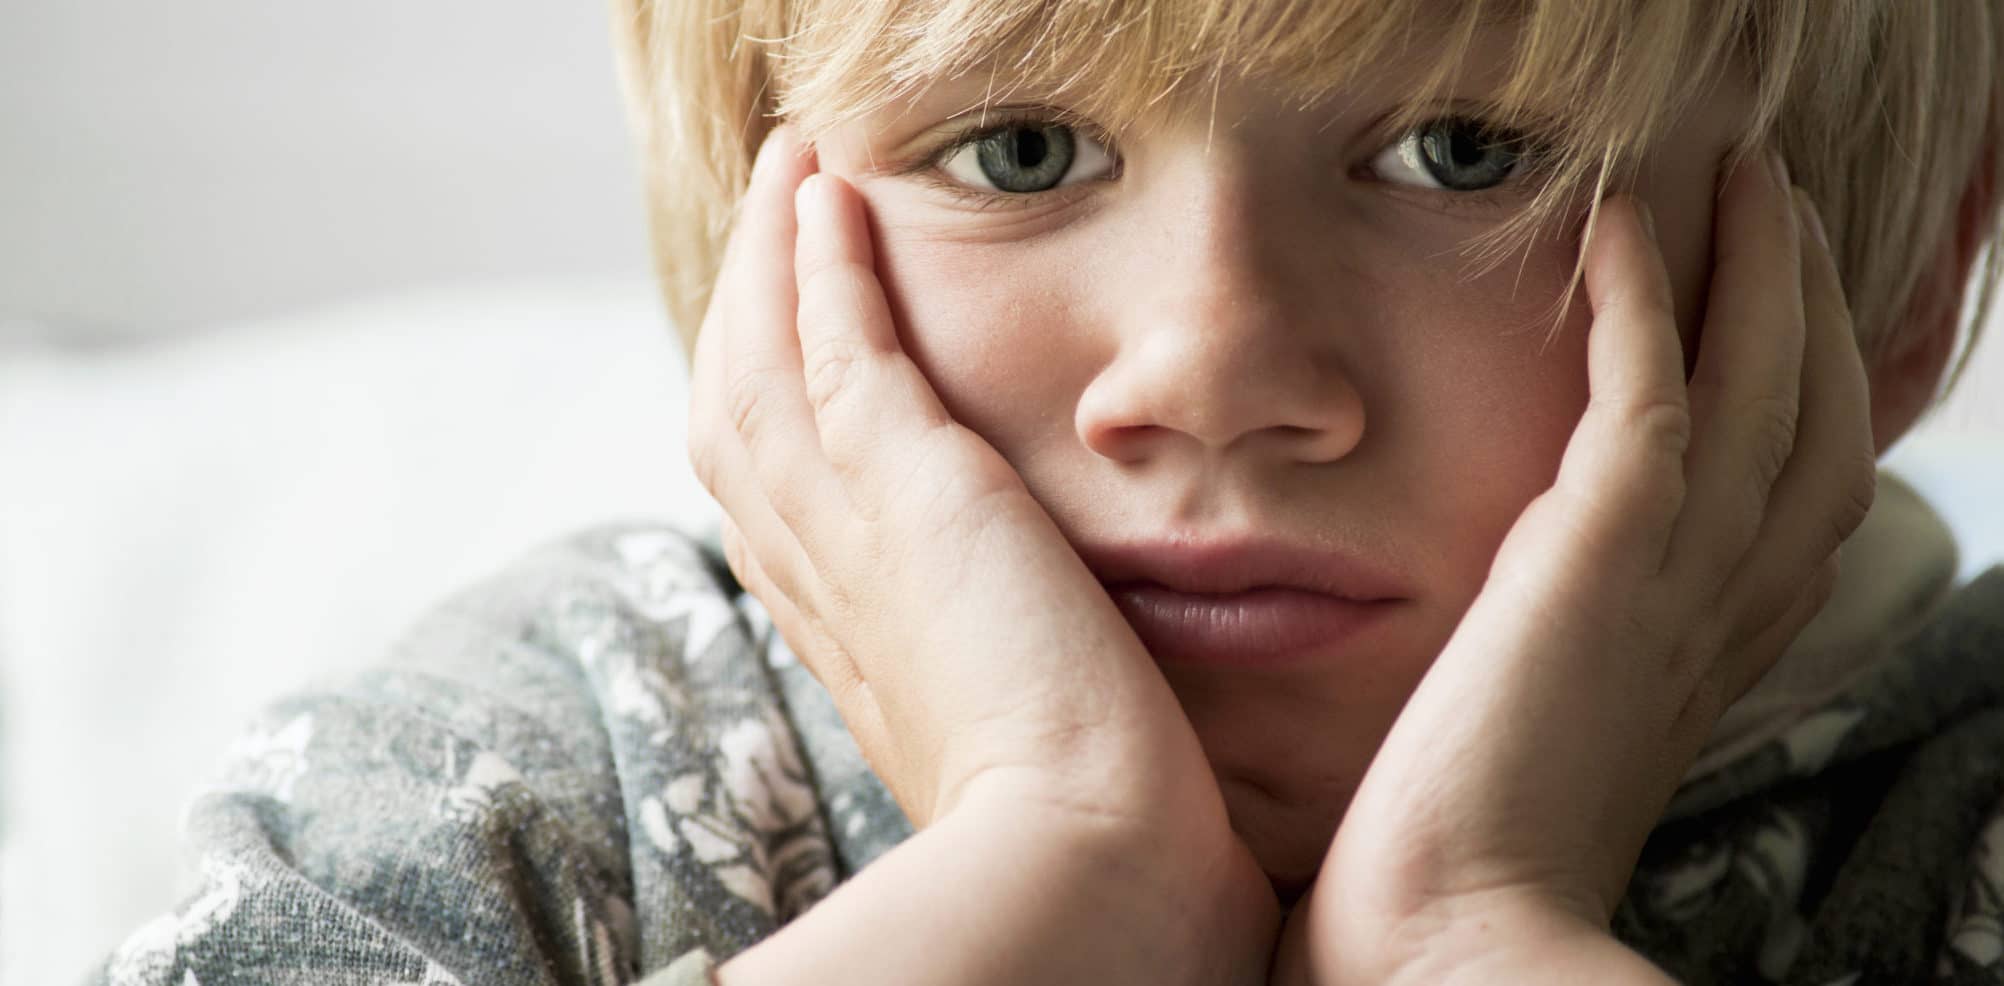 Six Tips to Calm an Anxious Child